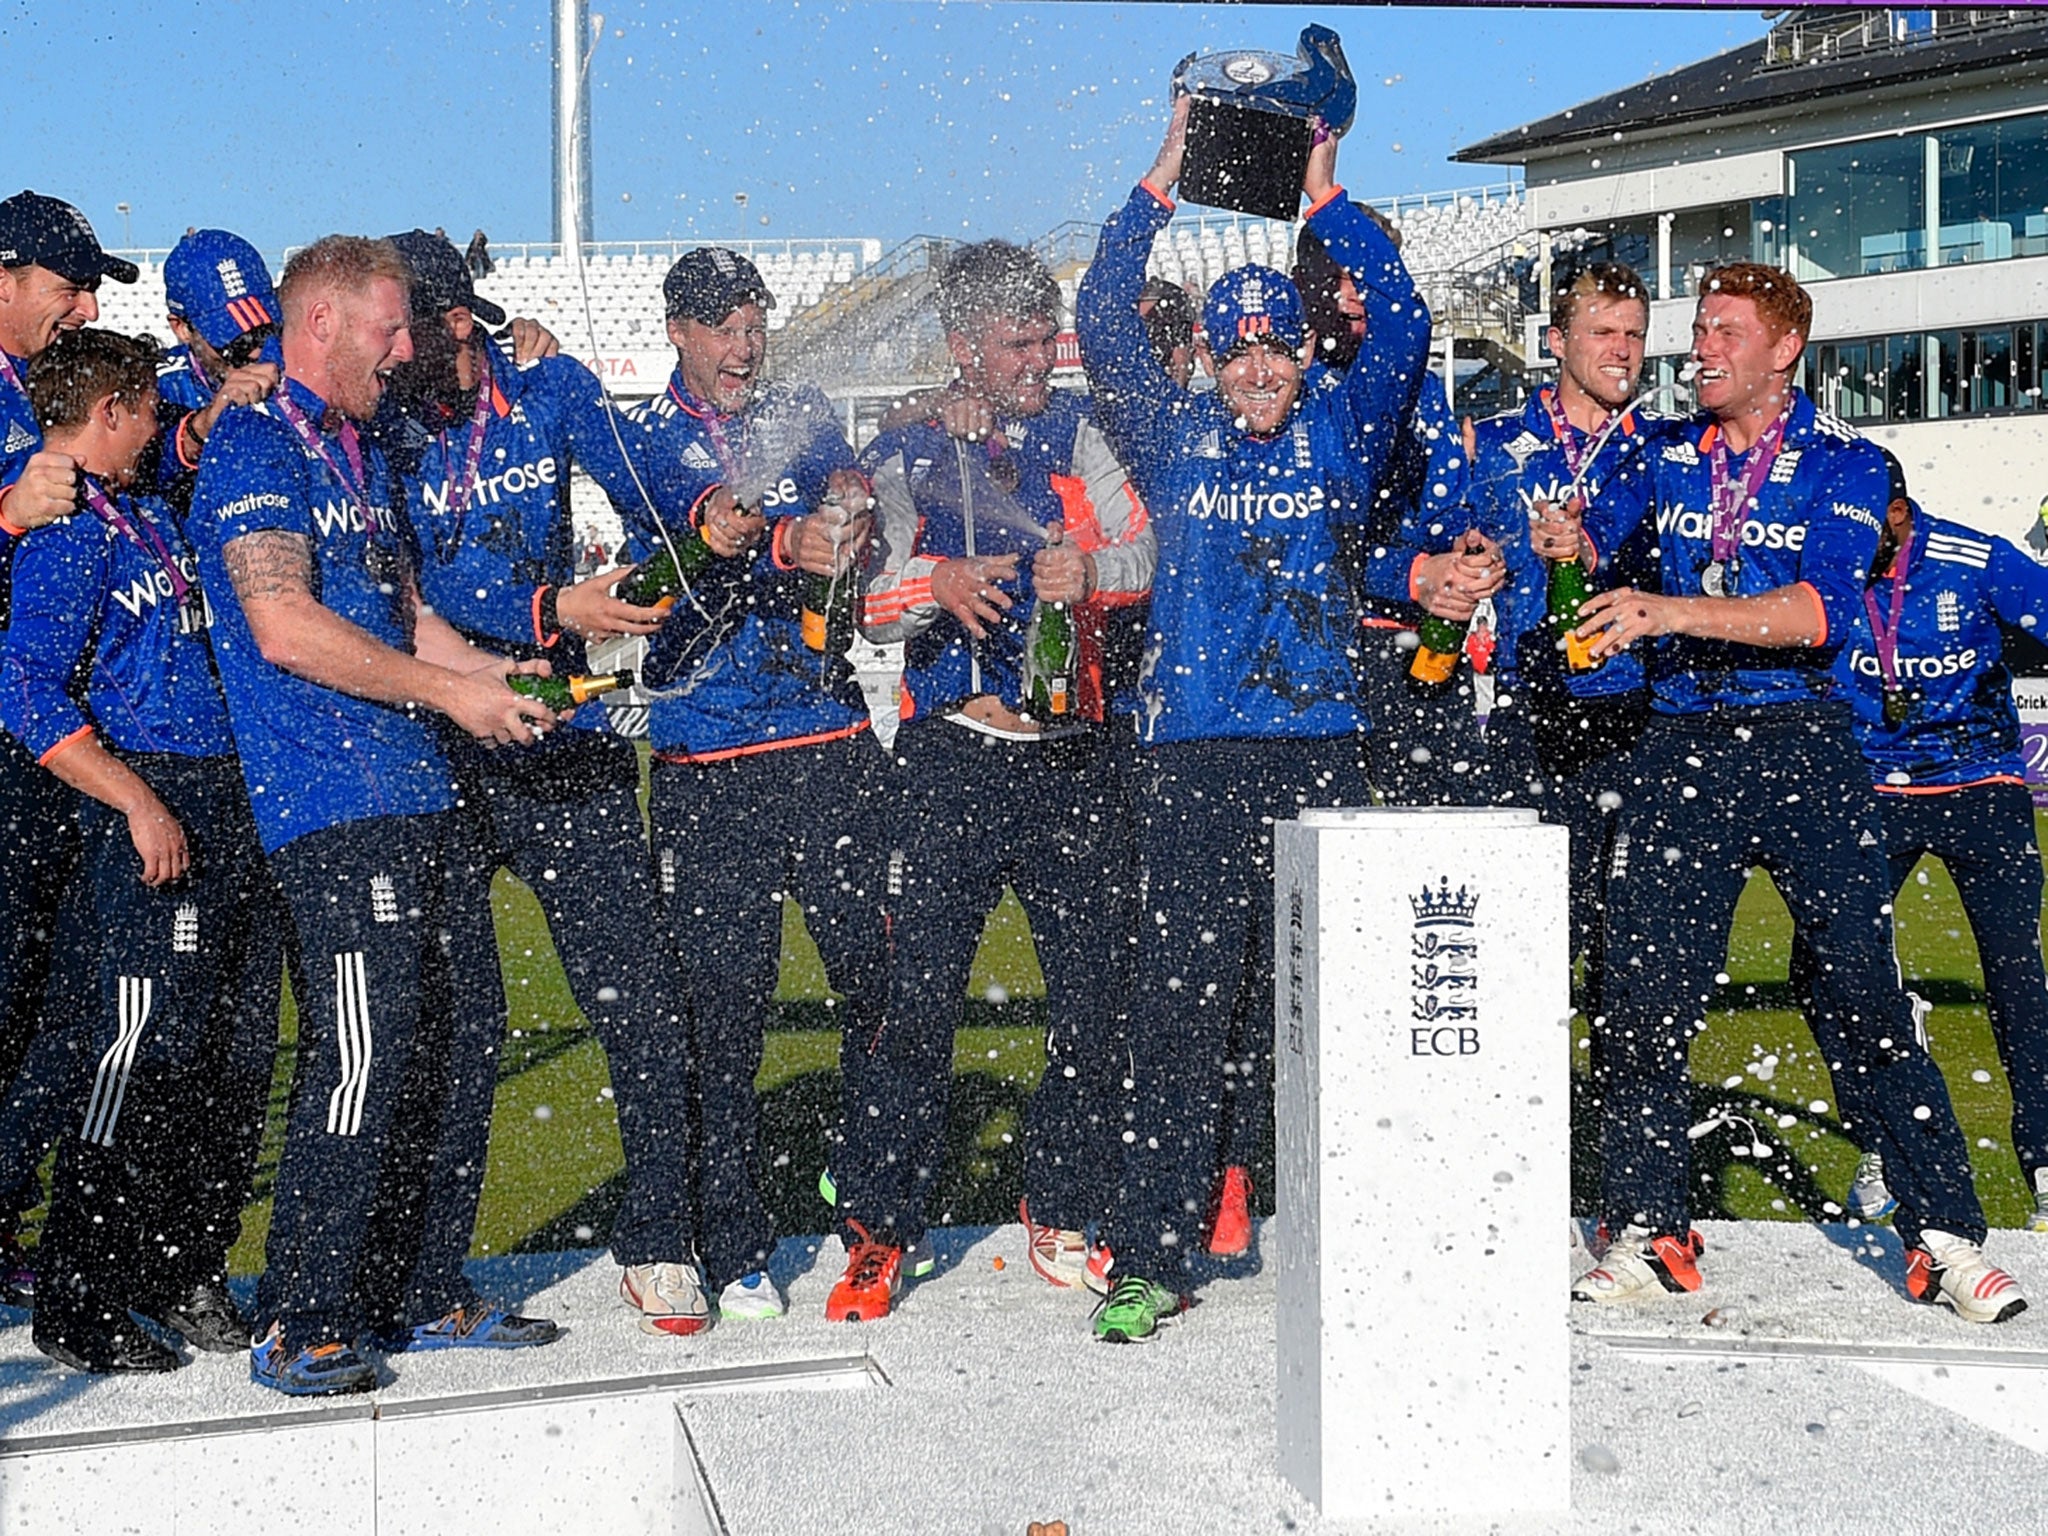 Jubilant England players lift the trophy and spray the bubbly after sealing a thrilling 3-2 one-day series victory over New Zealand at Chester-le-Street